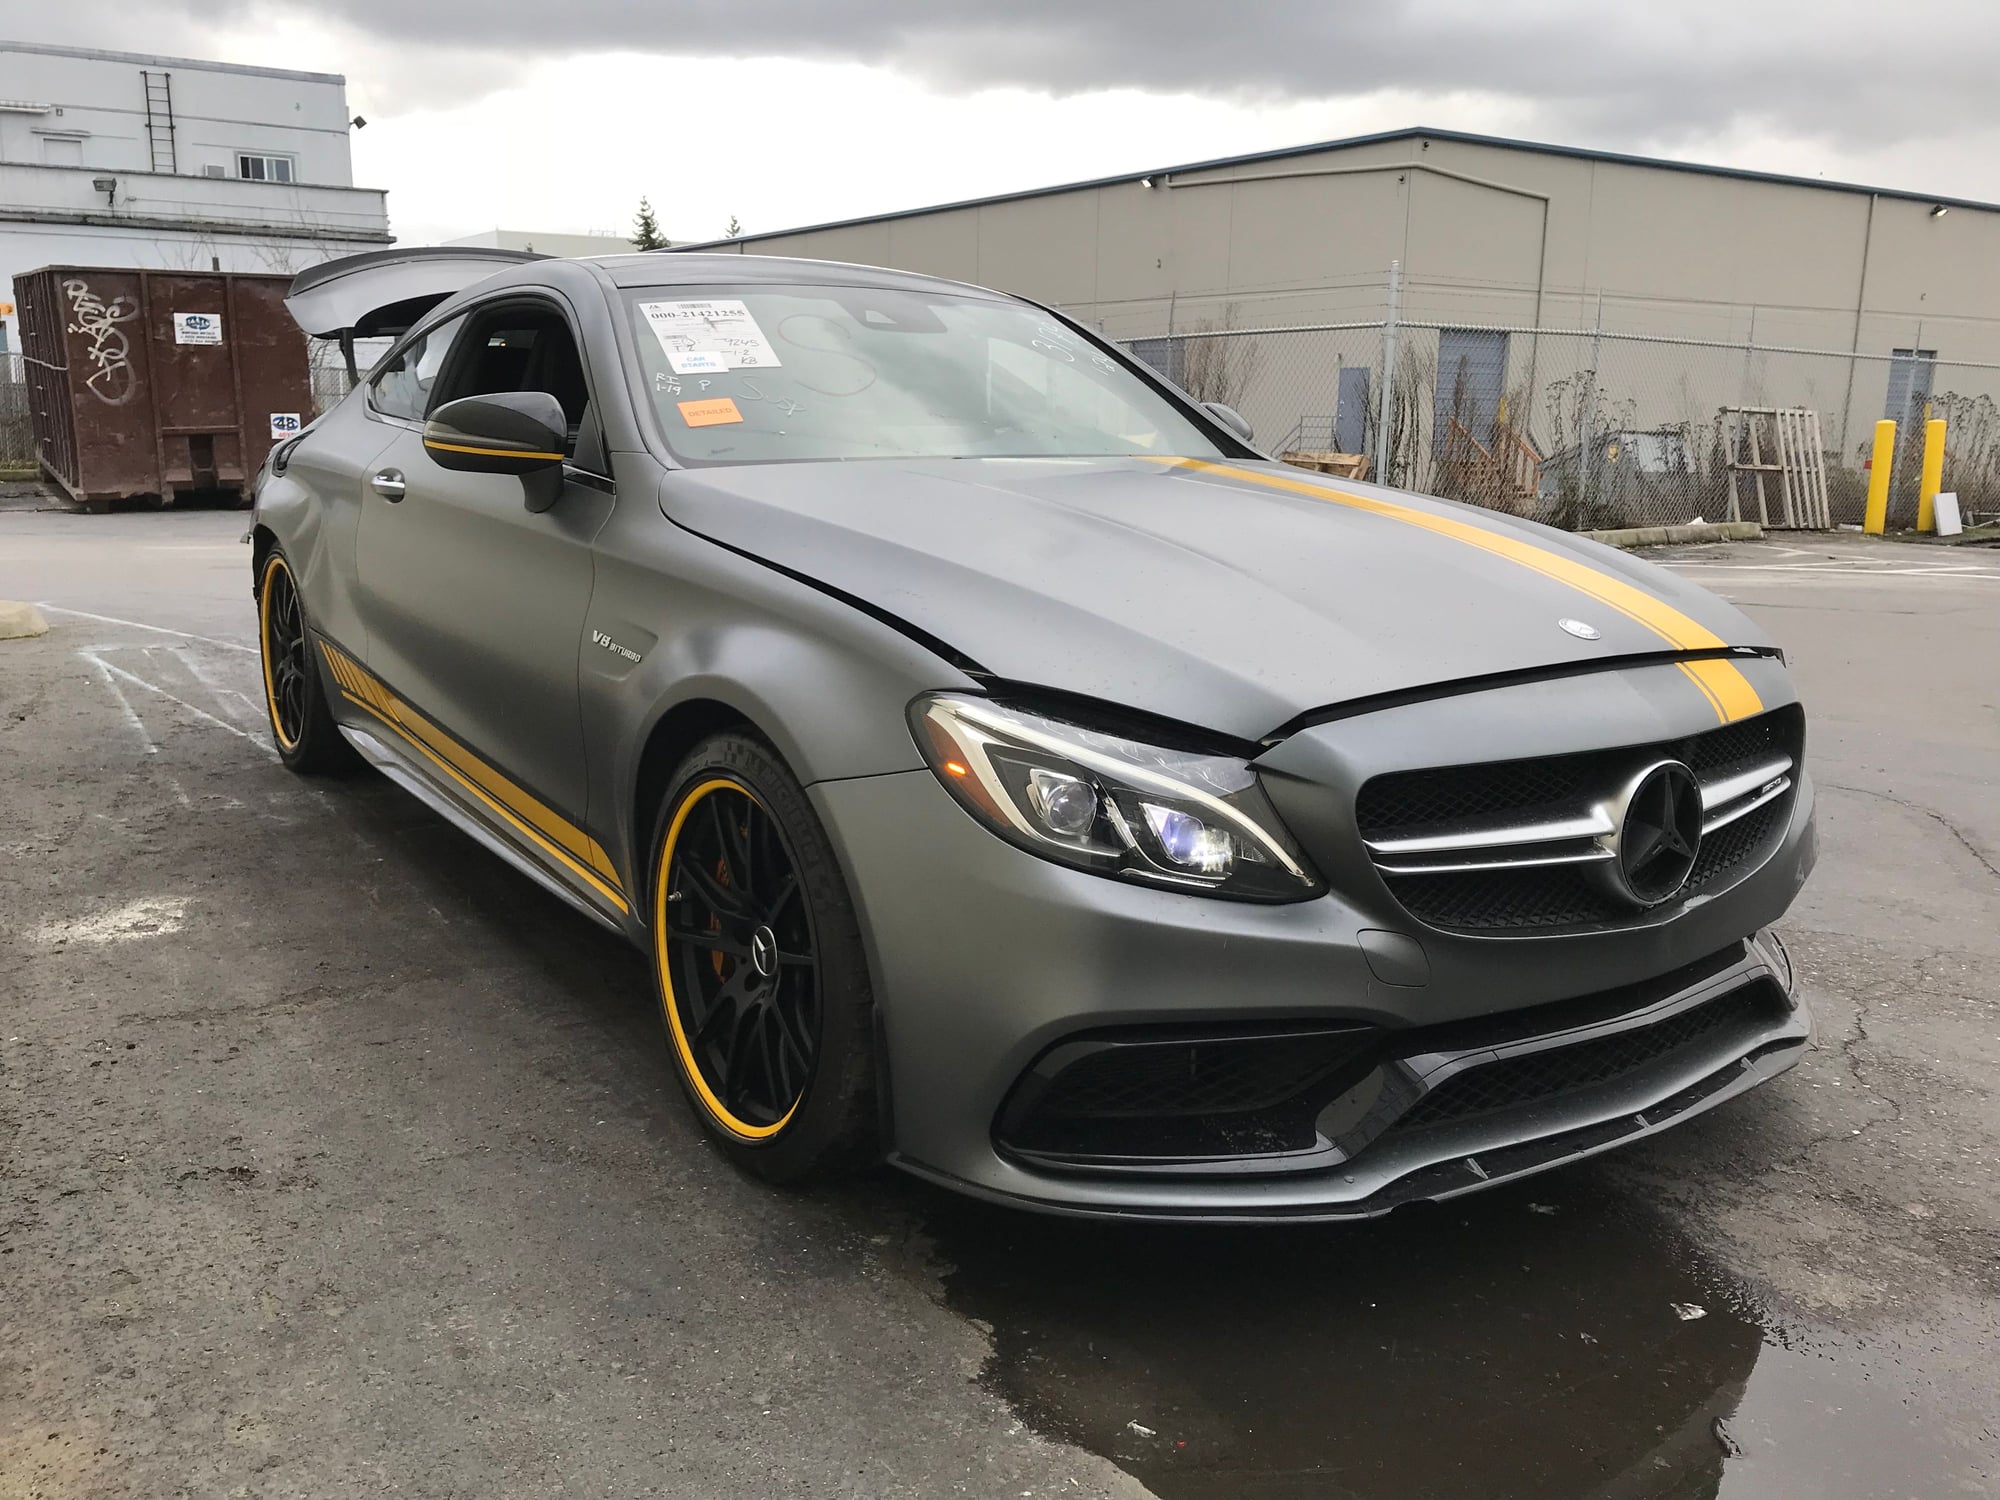 2010 Mercedes-Benz SLK350 - 2017 Mercedes C63S Edition 1 PARTING OUT - only 9245 miles! - Kent, WA 98032, United States